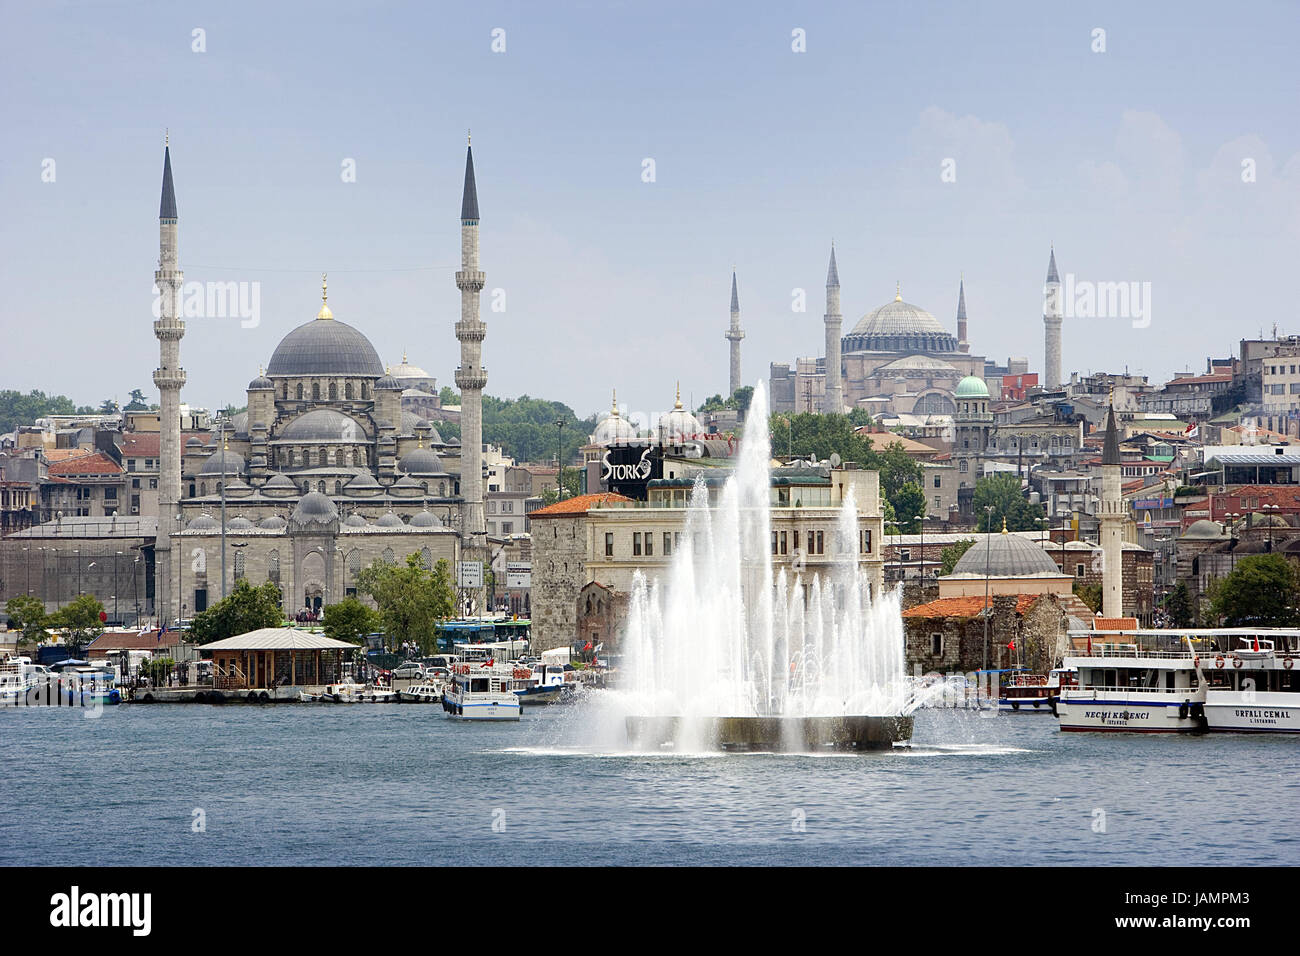 Turkey,Istanbul,town view,mosque,Hagia Sophia,harbour,play of water,town,city,metropolis,port,culture,tourism,place of interest,structures,architecture,landmark,museum,dome,minarets,historically,church,sacred construction,faith,religion,Islam,jet,boots, Stock Photo